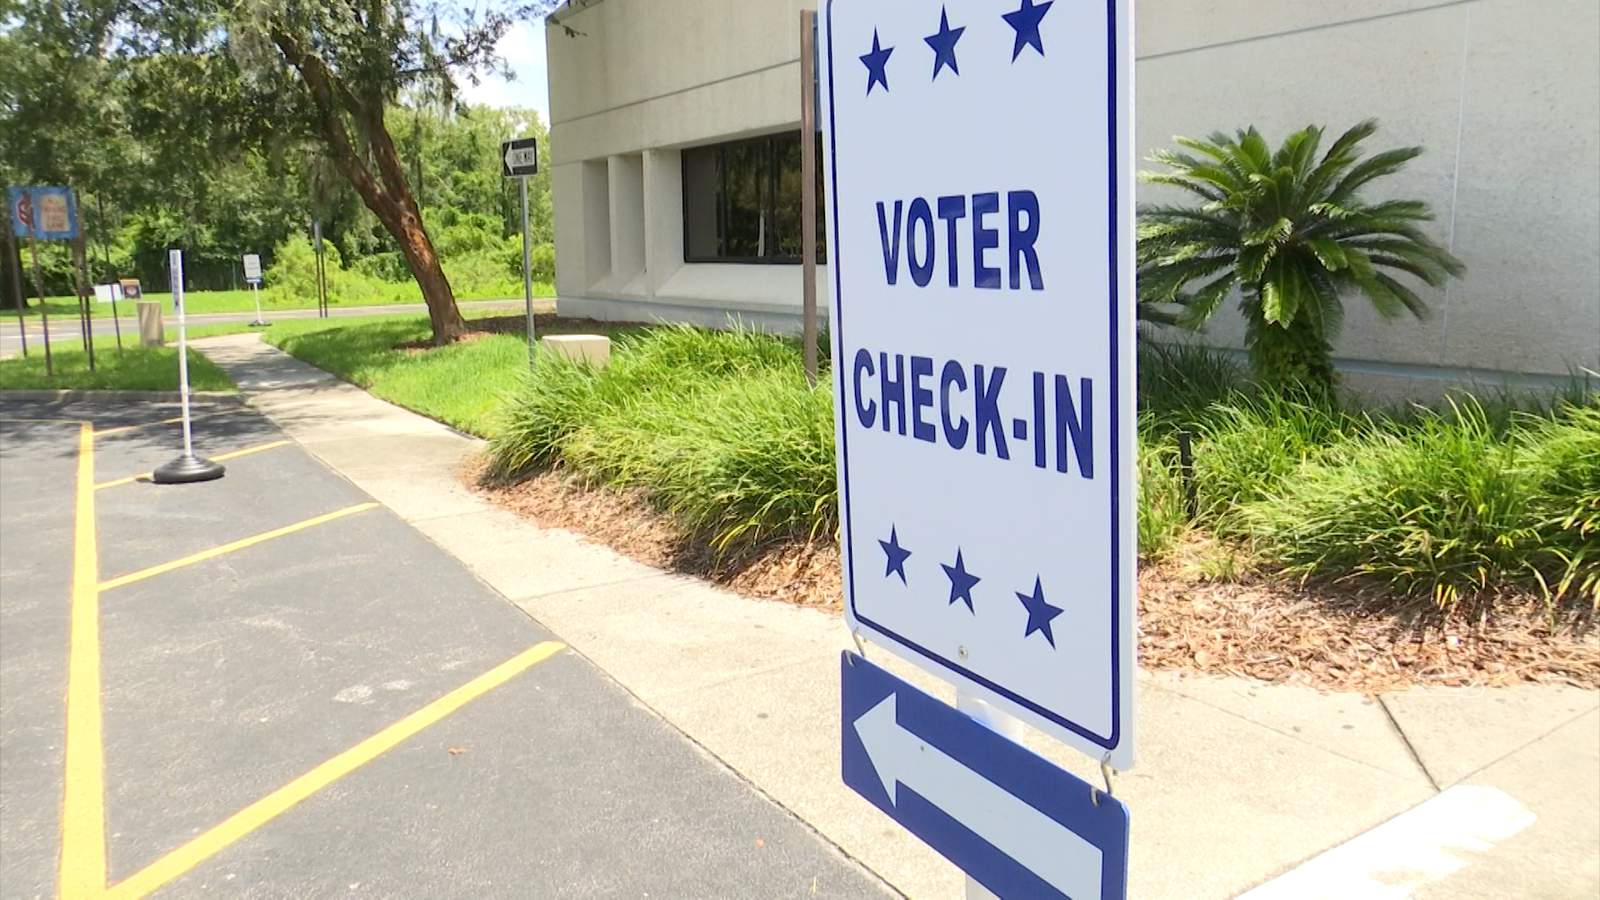 Despite drop in return poll workers, Primaries fully staffed in Central Florida